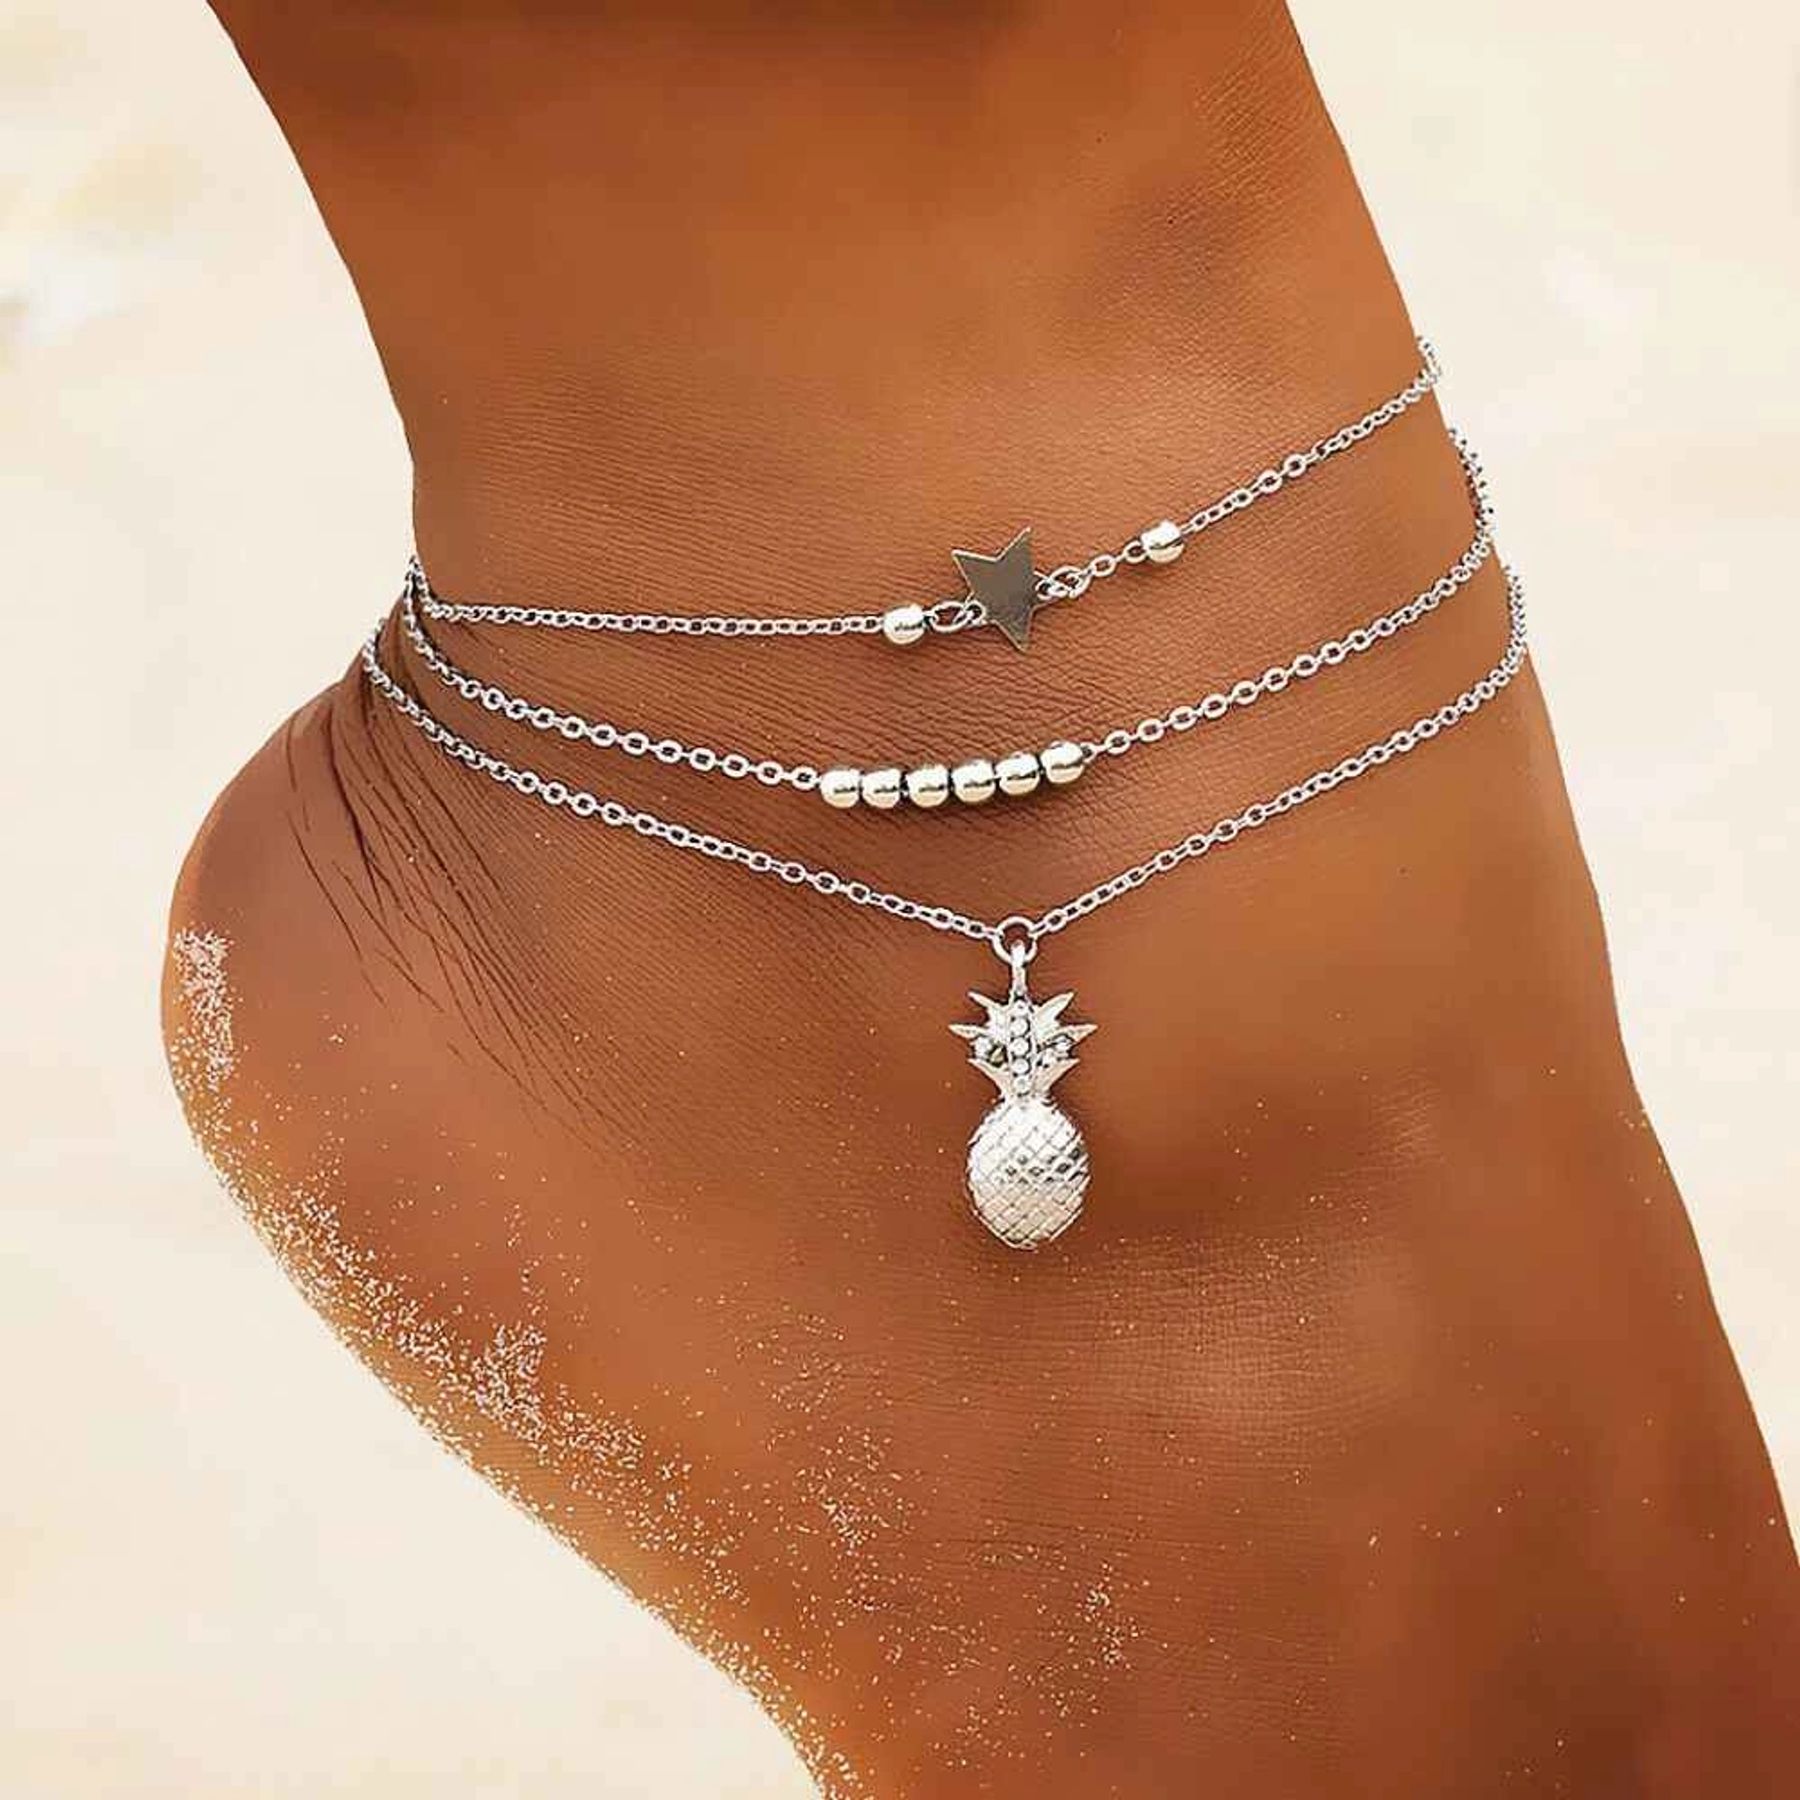 Academyus 2Pcs Fashion Star Beads Pineapple Women Beach Ankle Chain Anklet Foot Jewelry 